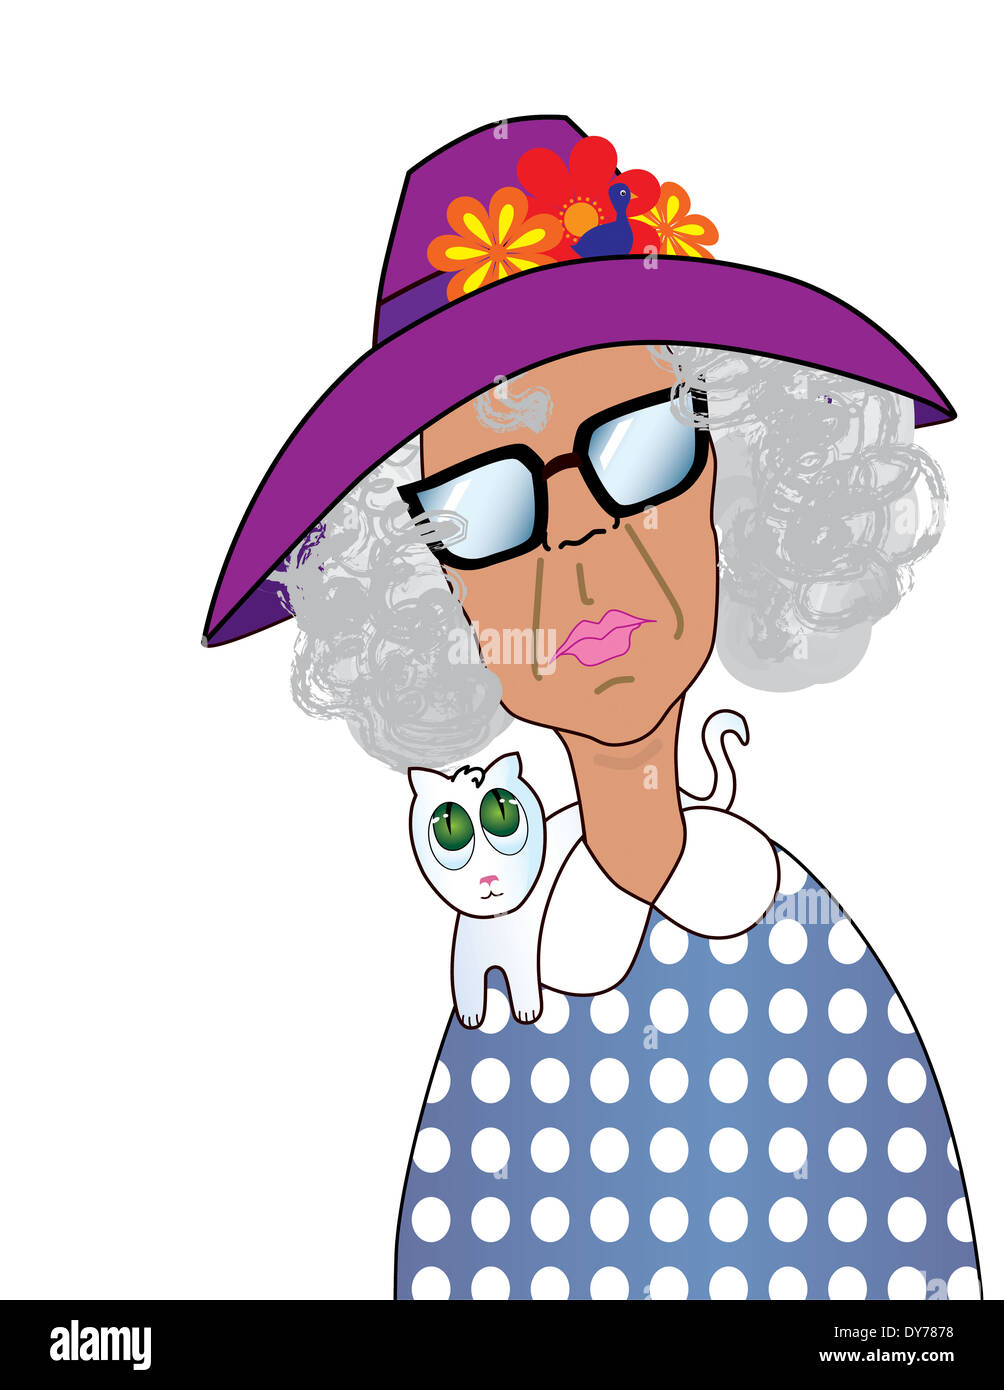 Fun Cartoon Image of a Grumpy Old Lady in a Big Purple Hat with a Cat on  her Shoulders Stock Photo - Alamy